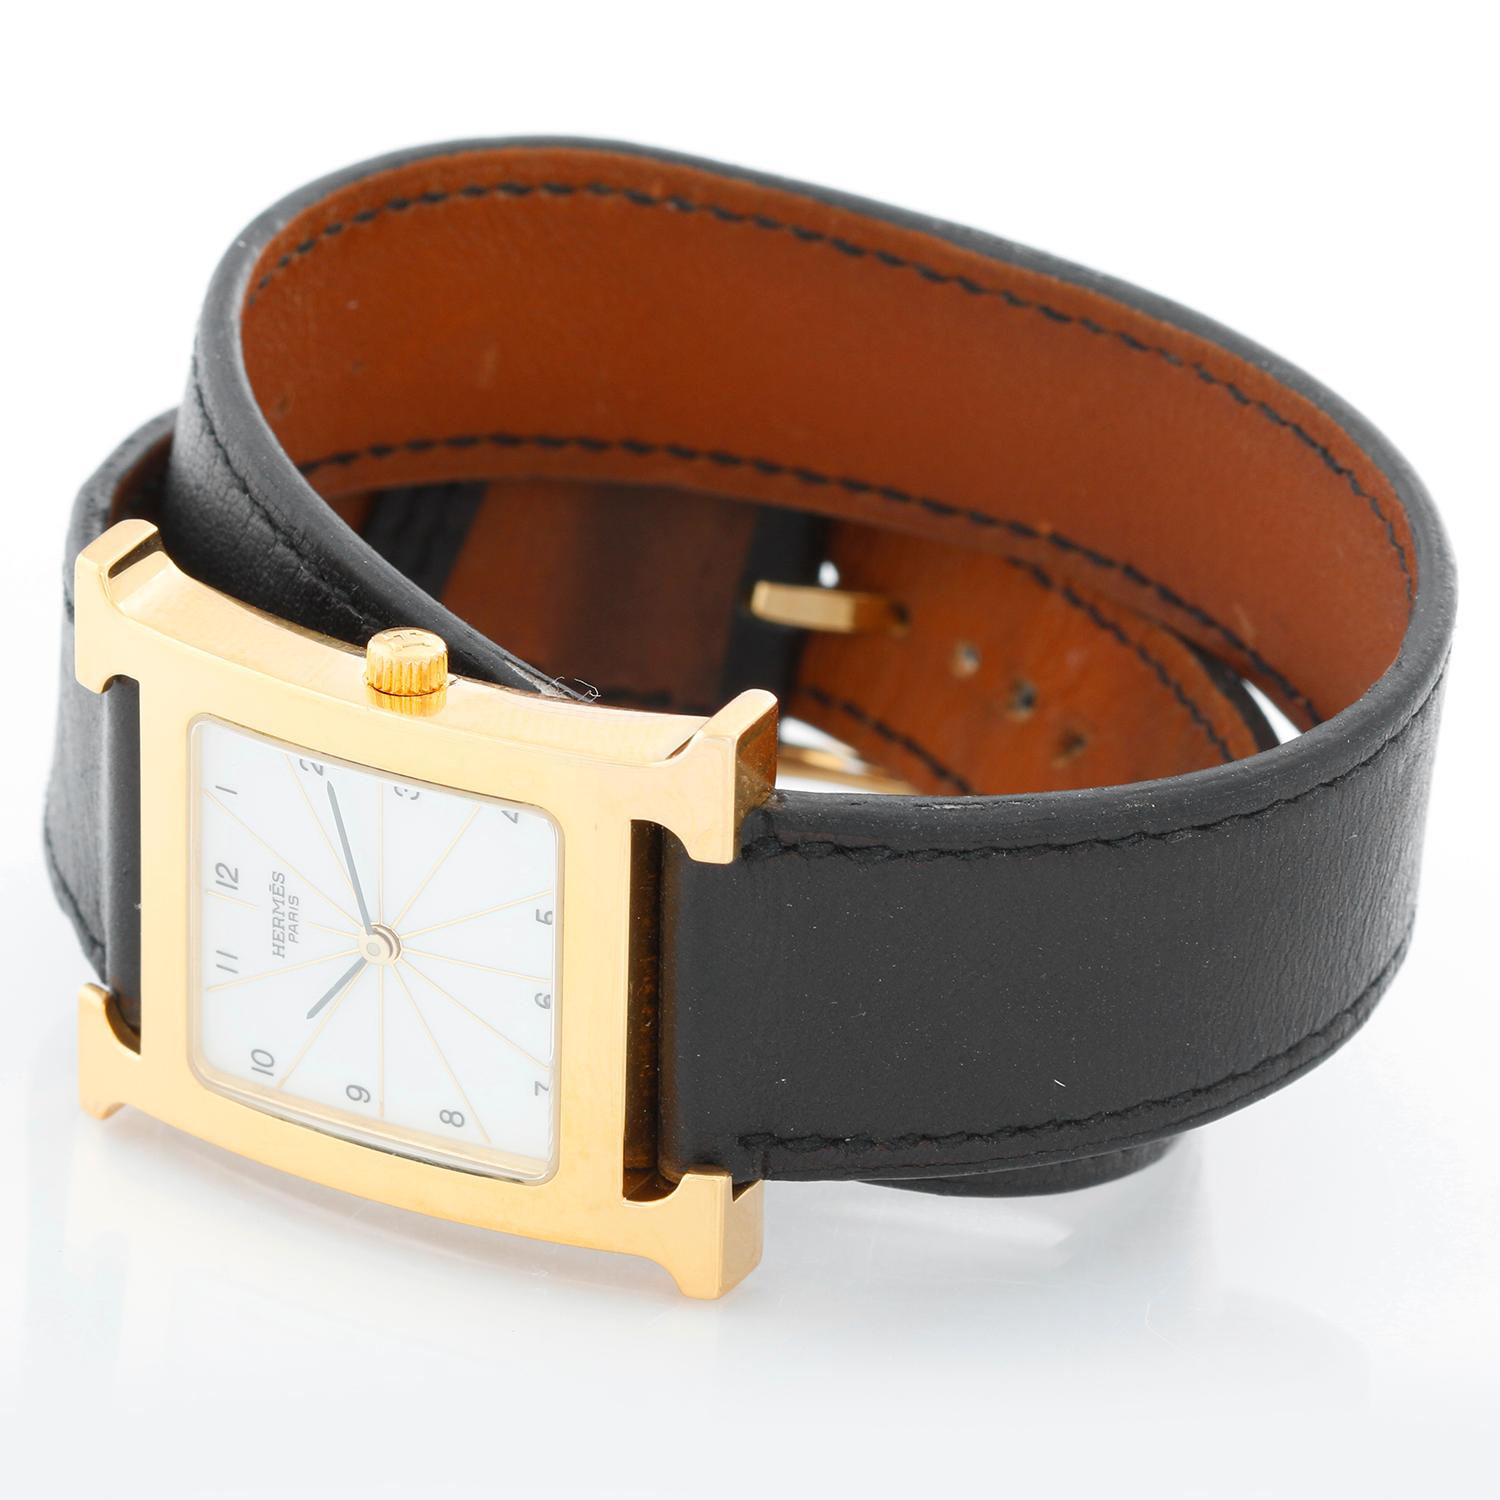 Hermes Heure H 18k Yellow Gold-Plated  Ladies Watch, HH1.501 - Quartz. Case is stainless steel, 18k yellow gold-plated (30mm x 35mm). Dial is  gloss white with Arabic numerals, sapphire crystal. Double leather strap with tangle buckle . Pre-owned